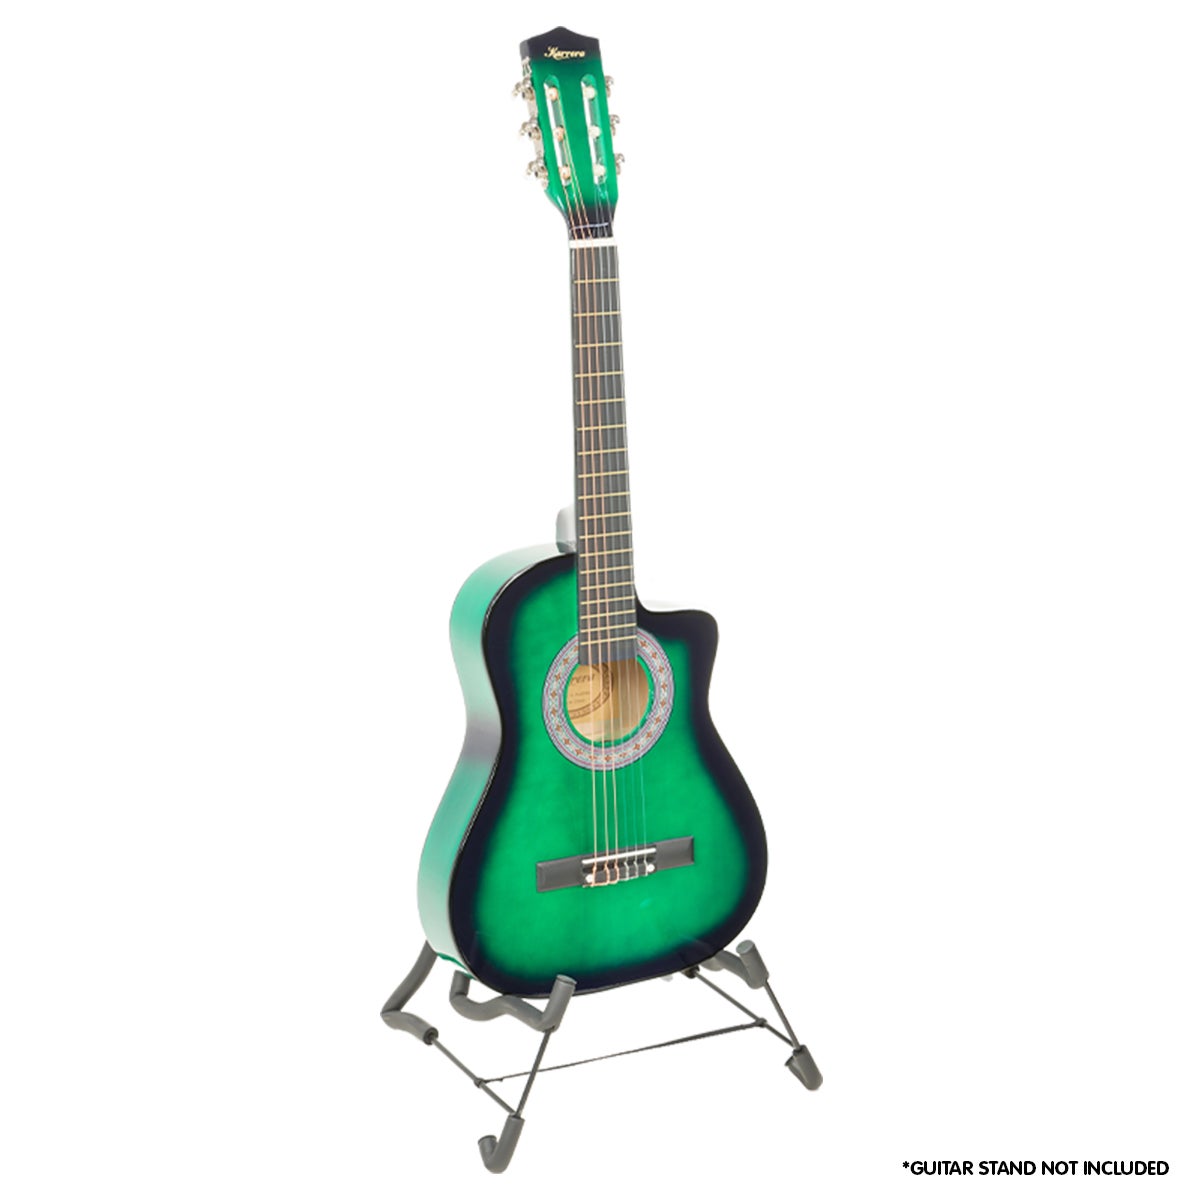 Karrera Childrens Acoustic Guitar Ideal Kids Gift 1/2 Size - Green